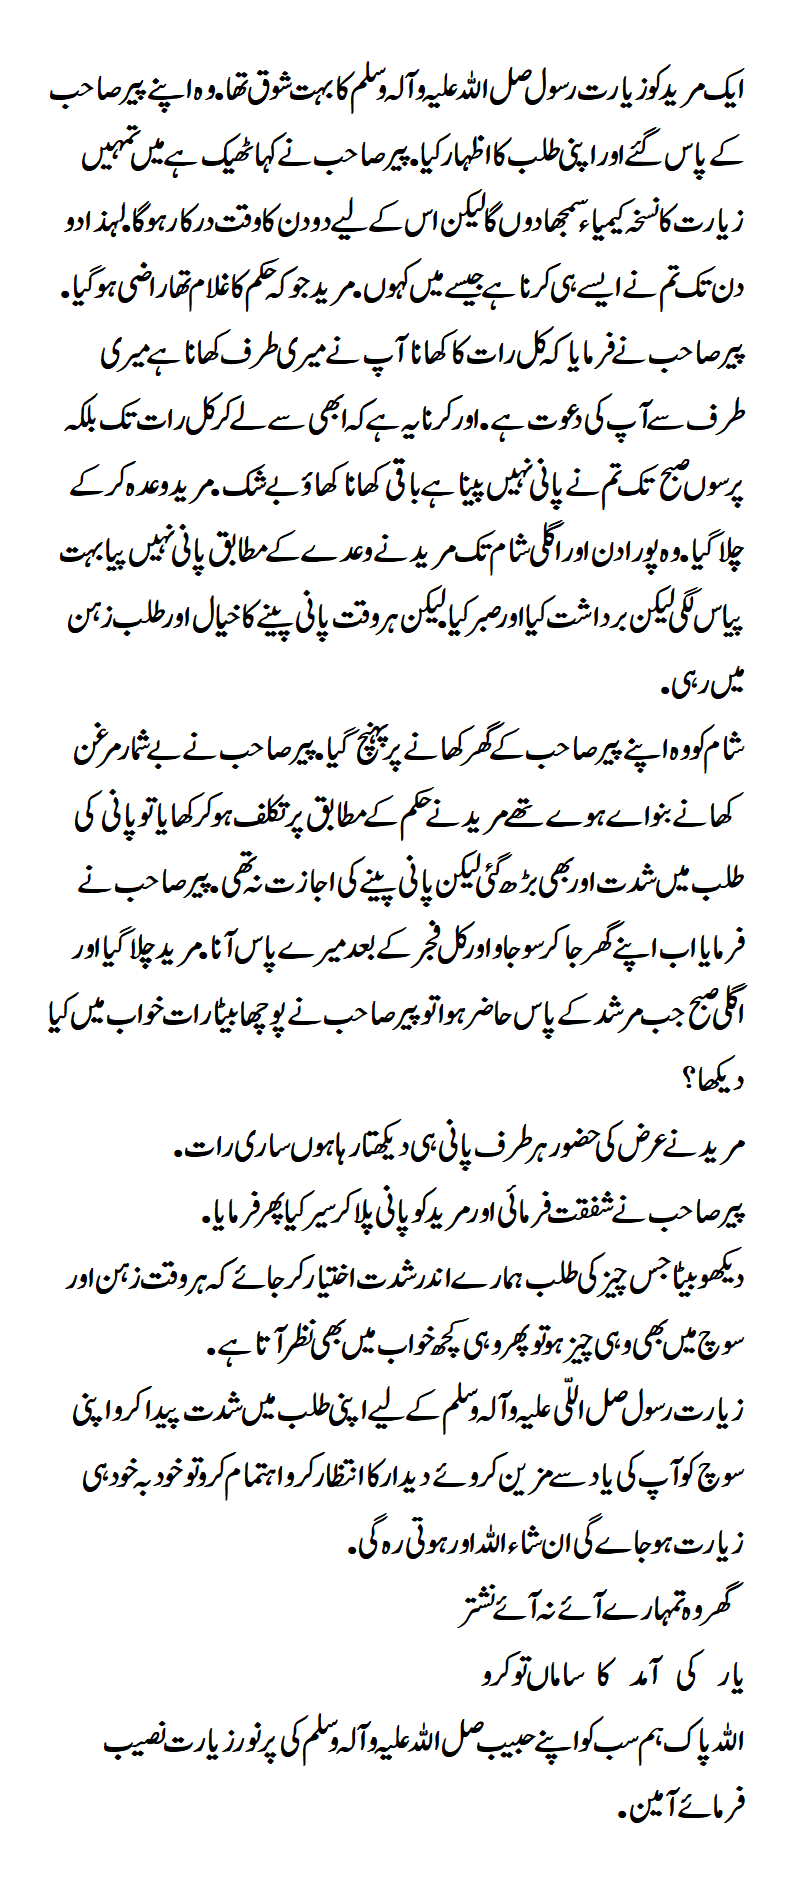 A disciple was very fond of visiting the Holy Prophet (S.A.W.W)